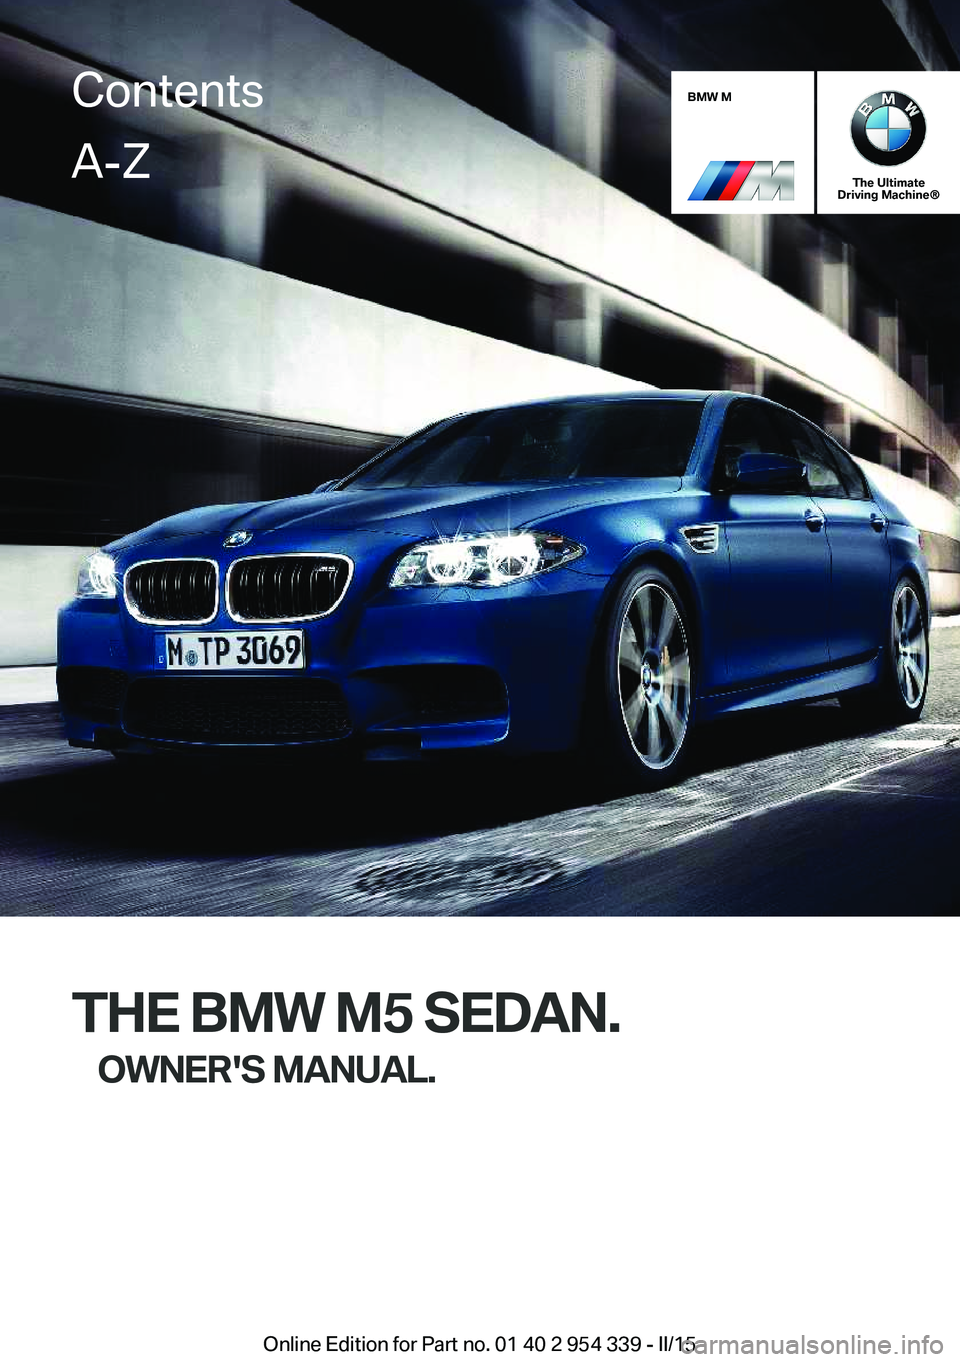 BMW M5 SEDAN 2016  Owners Manual BMW M
The Ultimate
Driving Machine®
THE BMW M5 SEDAN.
OWNER'S MANUAL.
ContentsA-Z
Online Edition for Part no. 01 40 2 954 339 - II/15   